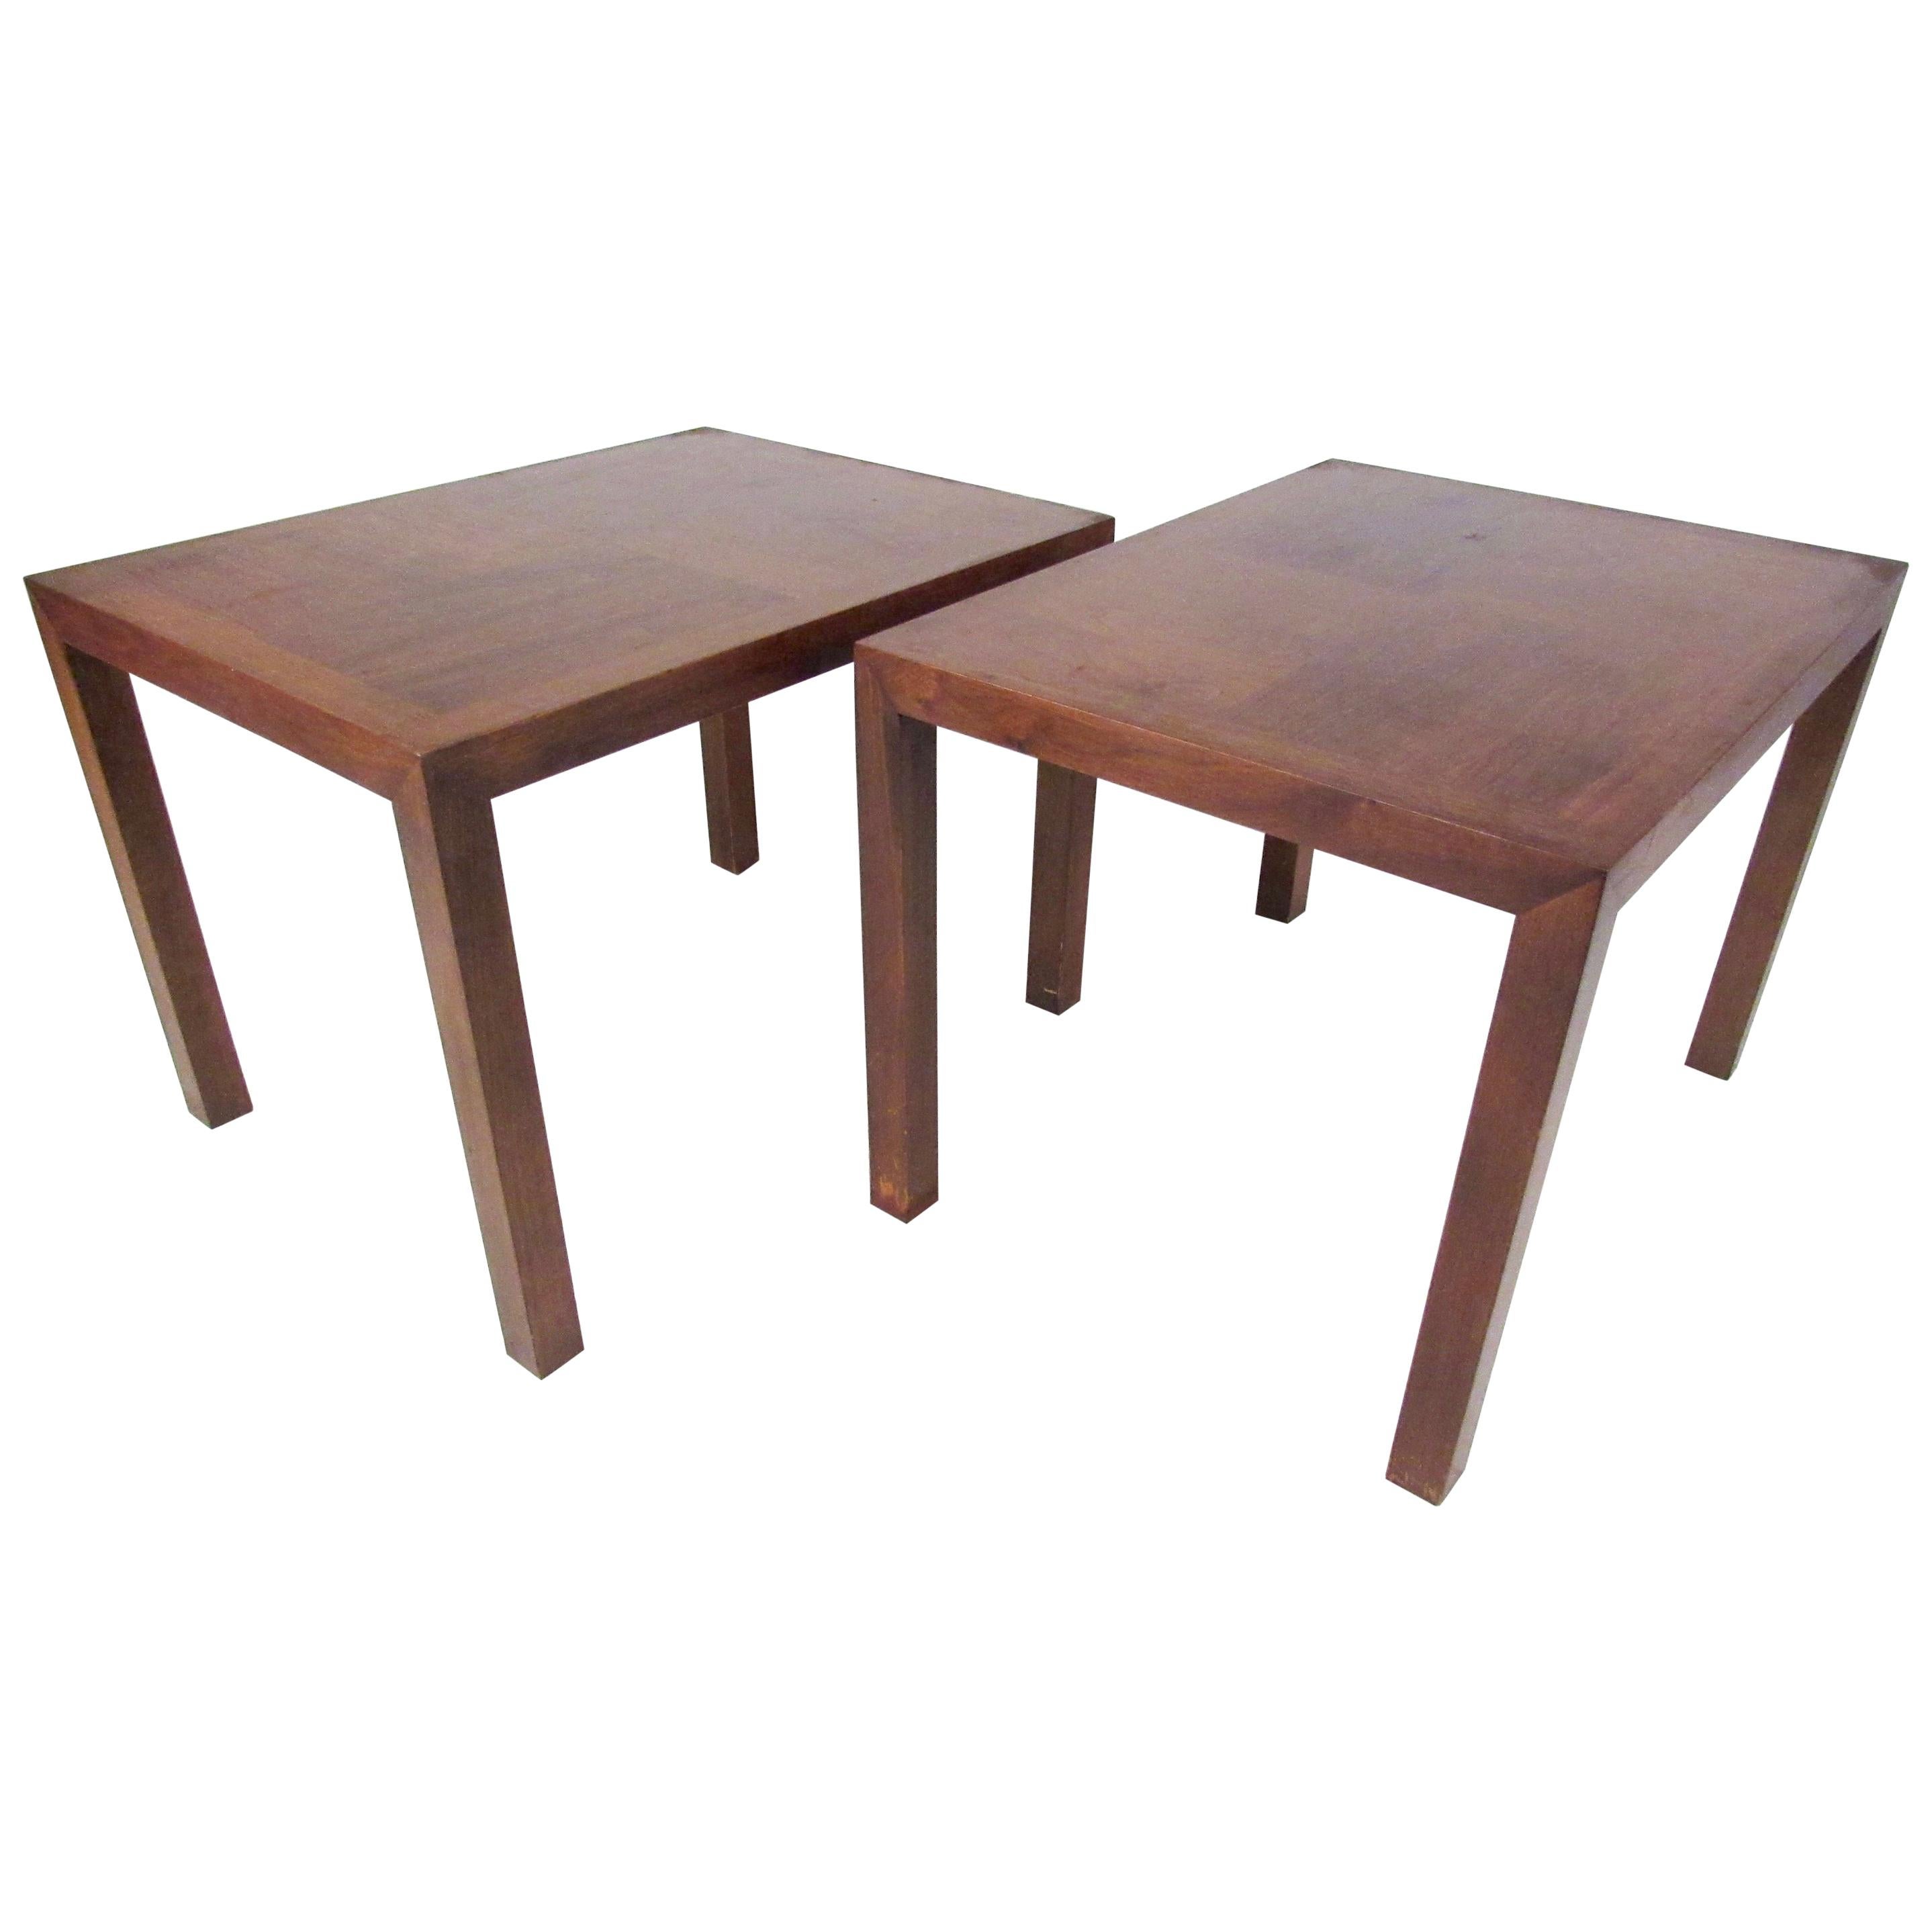 Pair of Parsons Style Walnut Lamp Tables by Lane For Sale